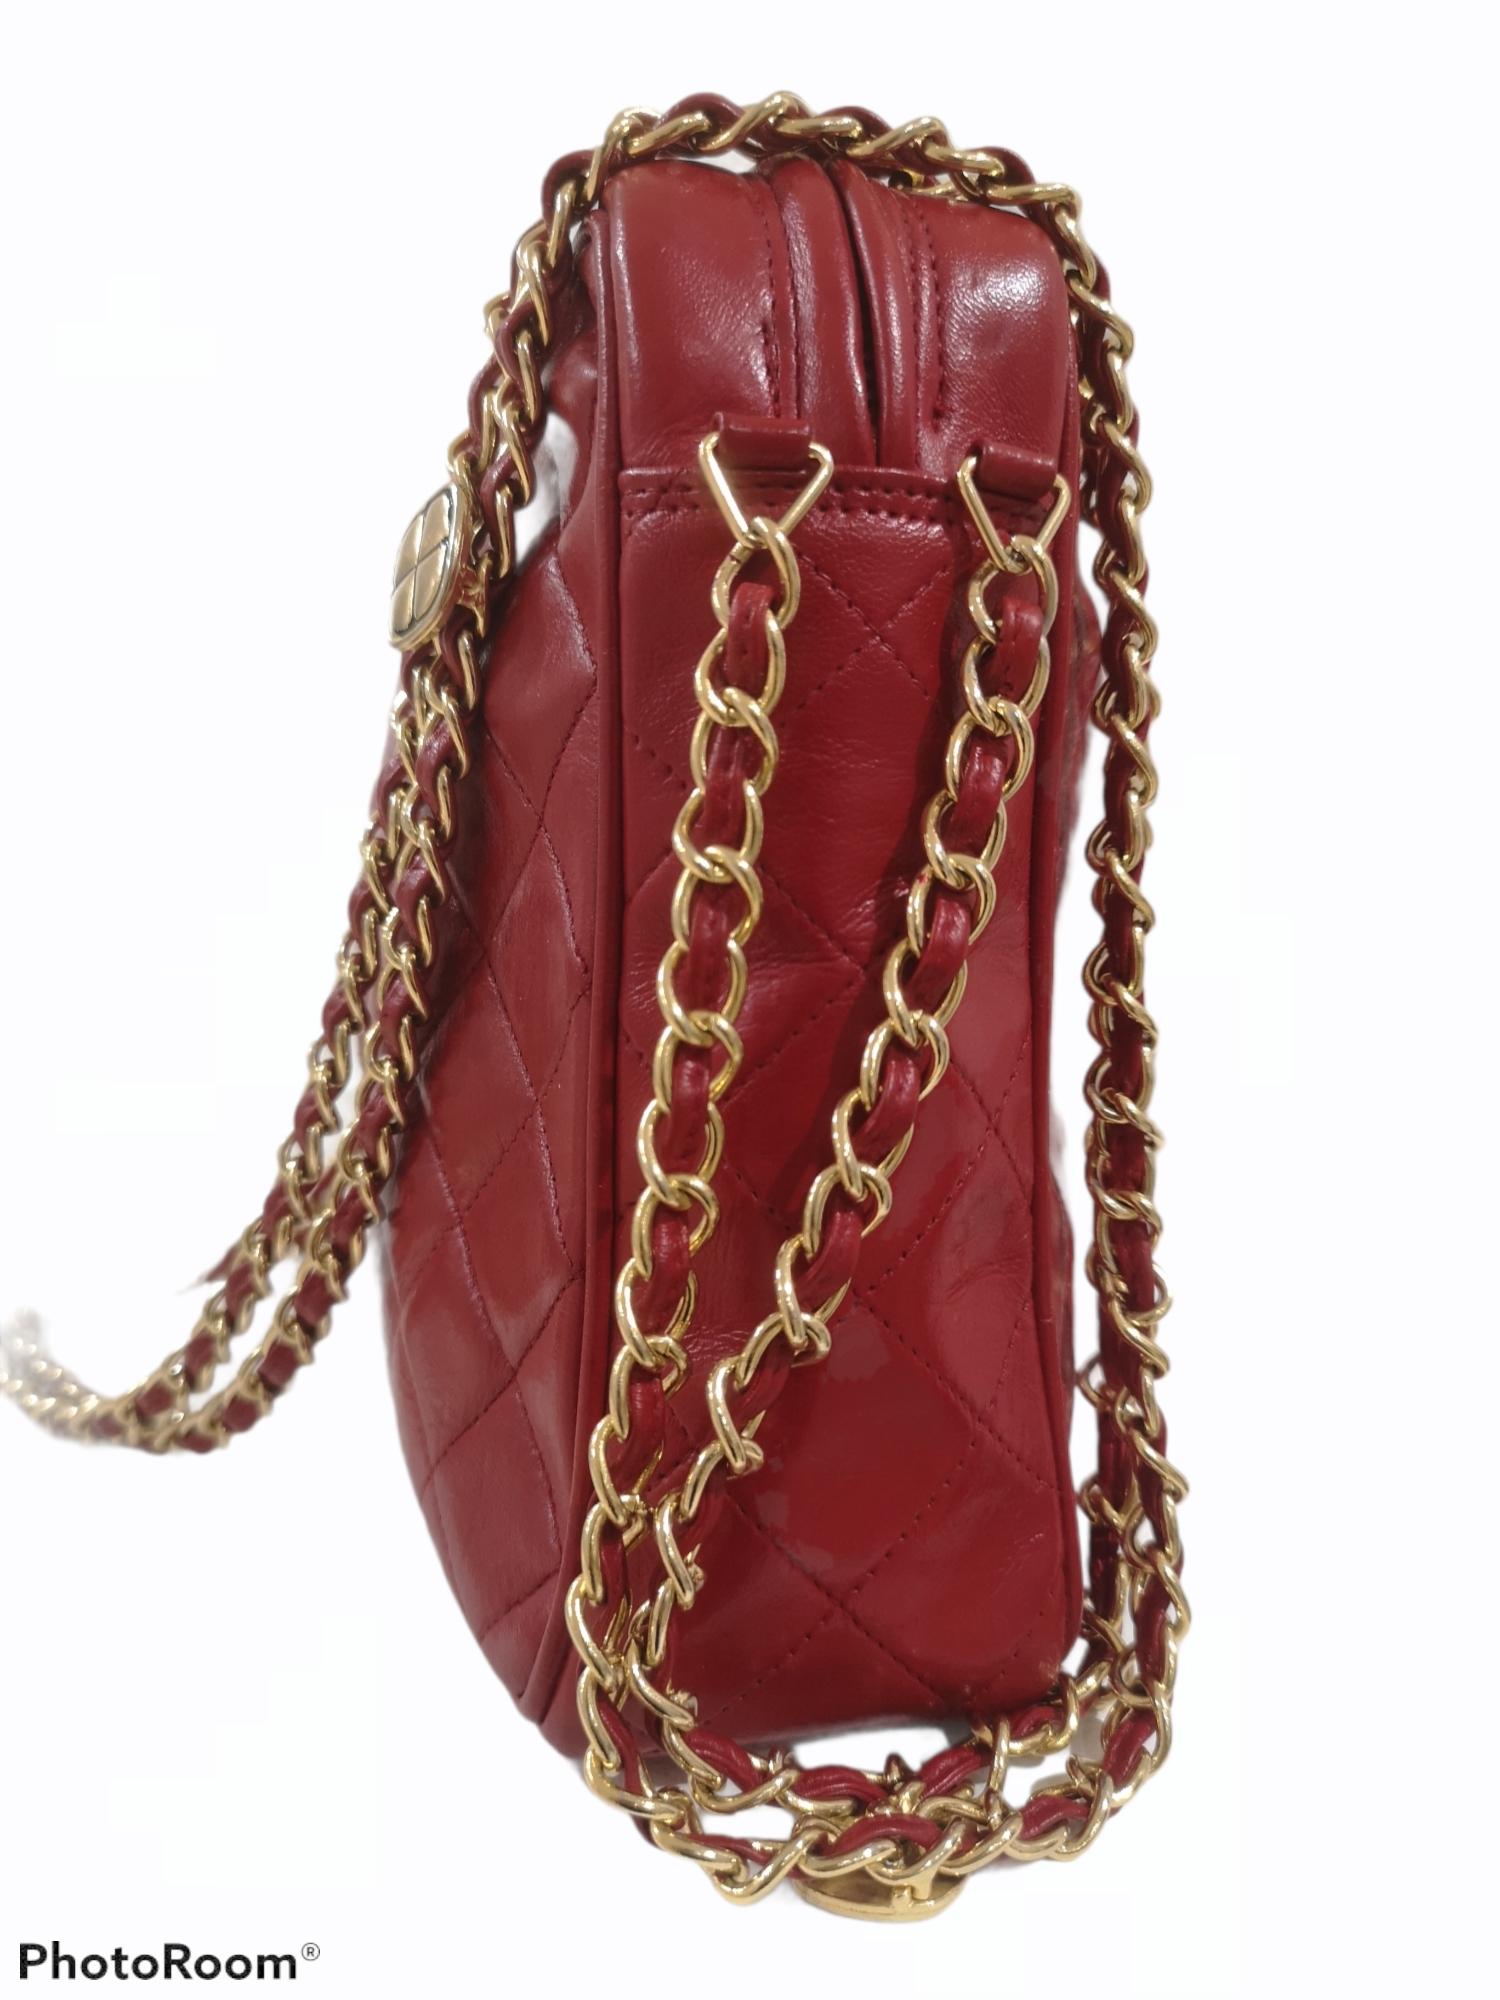 Chanel red leather gold tone chain shoulder bag
90s Red Chanel CC logo on the front, gold tone hardware with red leather fringes on the side and a red and gold tone shoulder strap
Can easily be worn as a crossbody too
Measurements: 21 * 27 cm, 8 cm